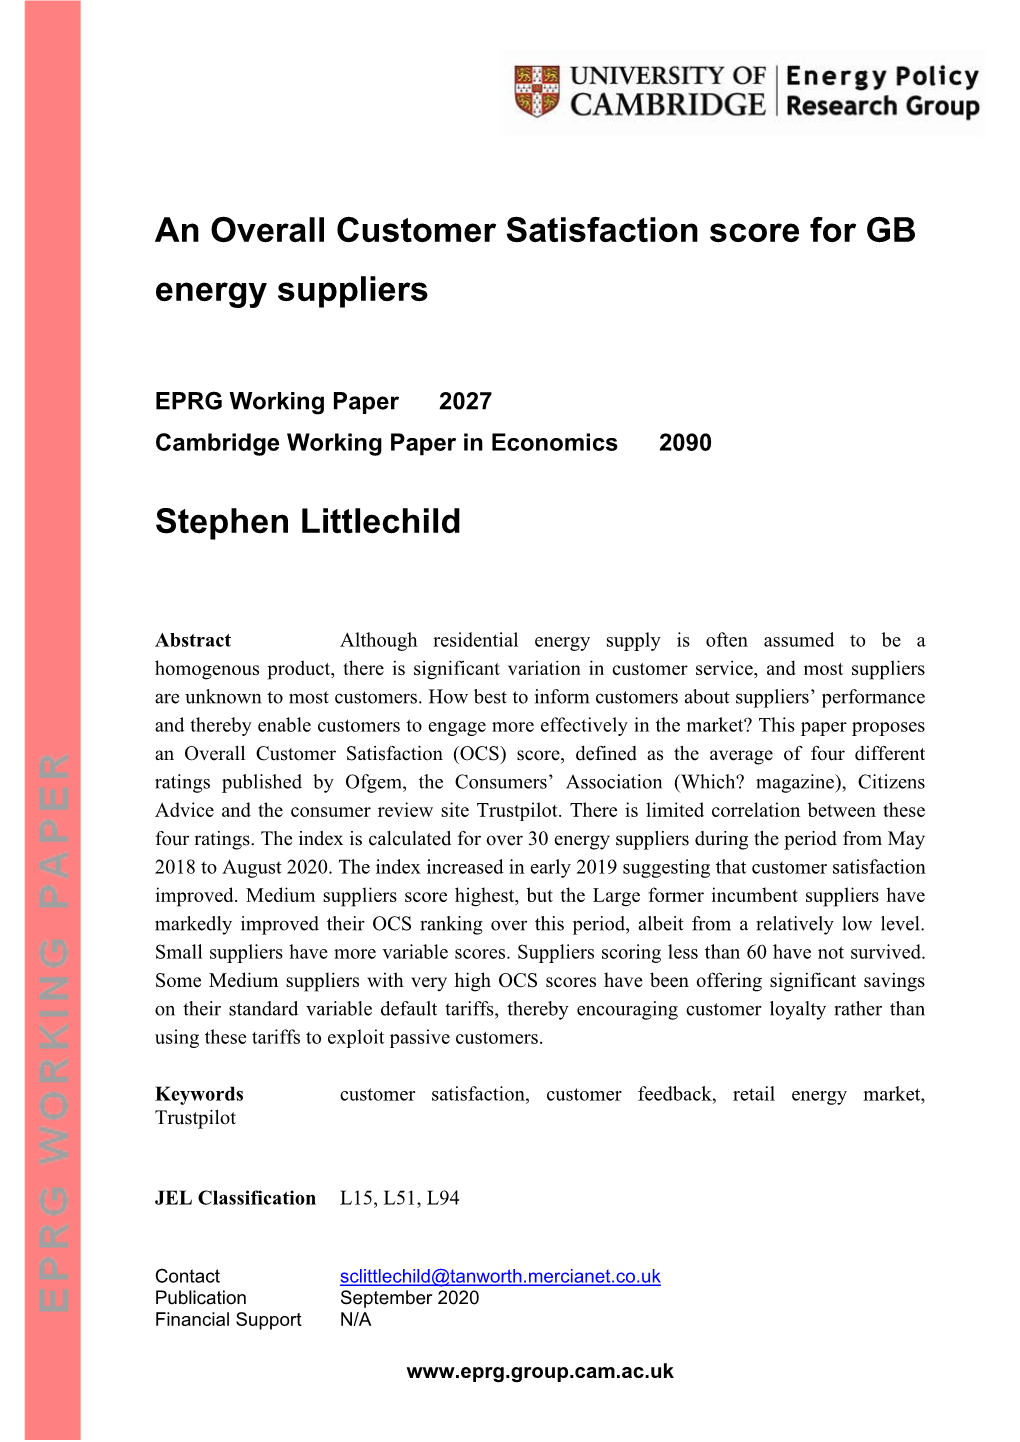 An Overall Customer Satisfaction Score for GB Energy Suppliers